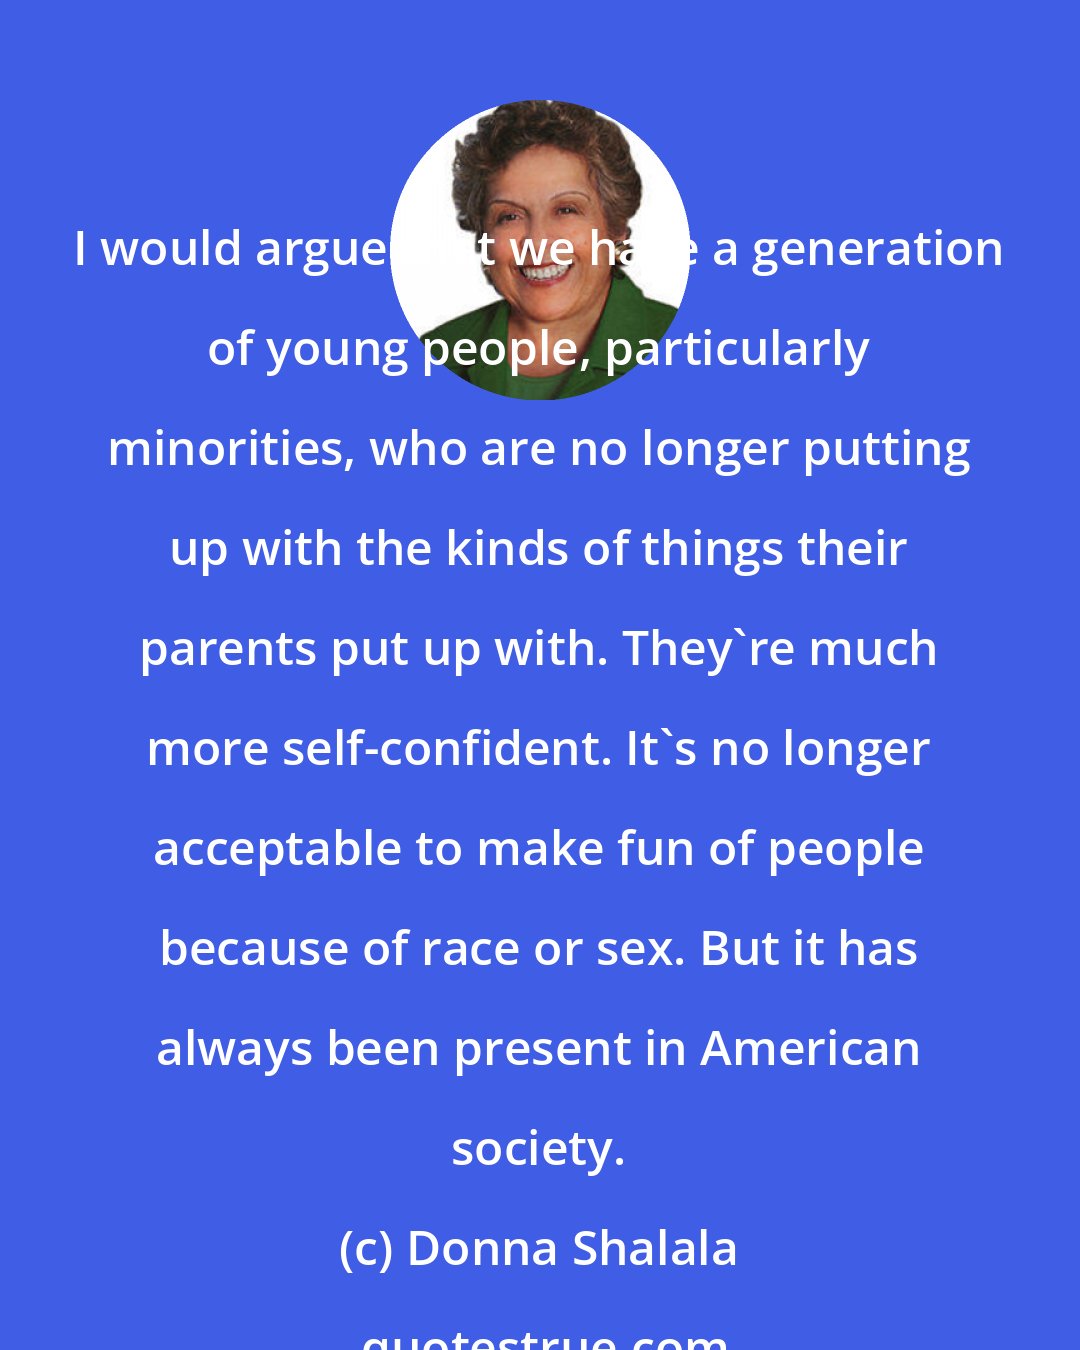 Donna Shalala: I would argue that we have a generation of young people, particularly minorities, who are no longer putting up with the kinds of things their parents put up with. They're much more self-confident. It's no longer acceptable to make fun of people because of race or sex. But it has always been present in American society.